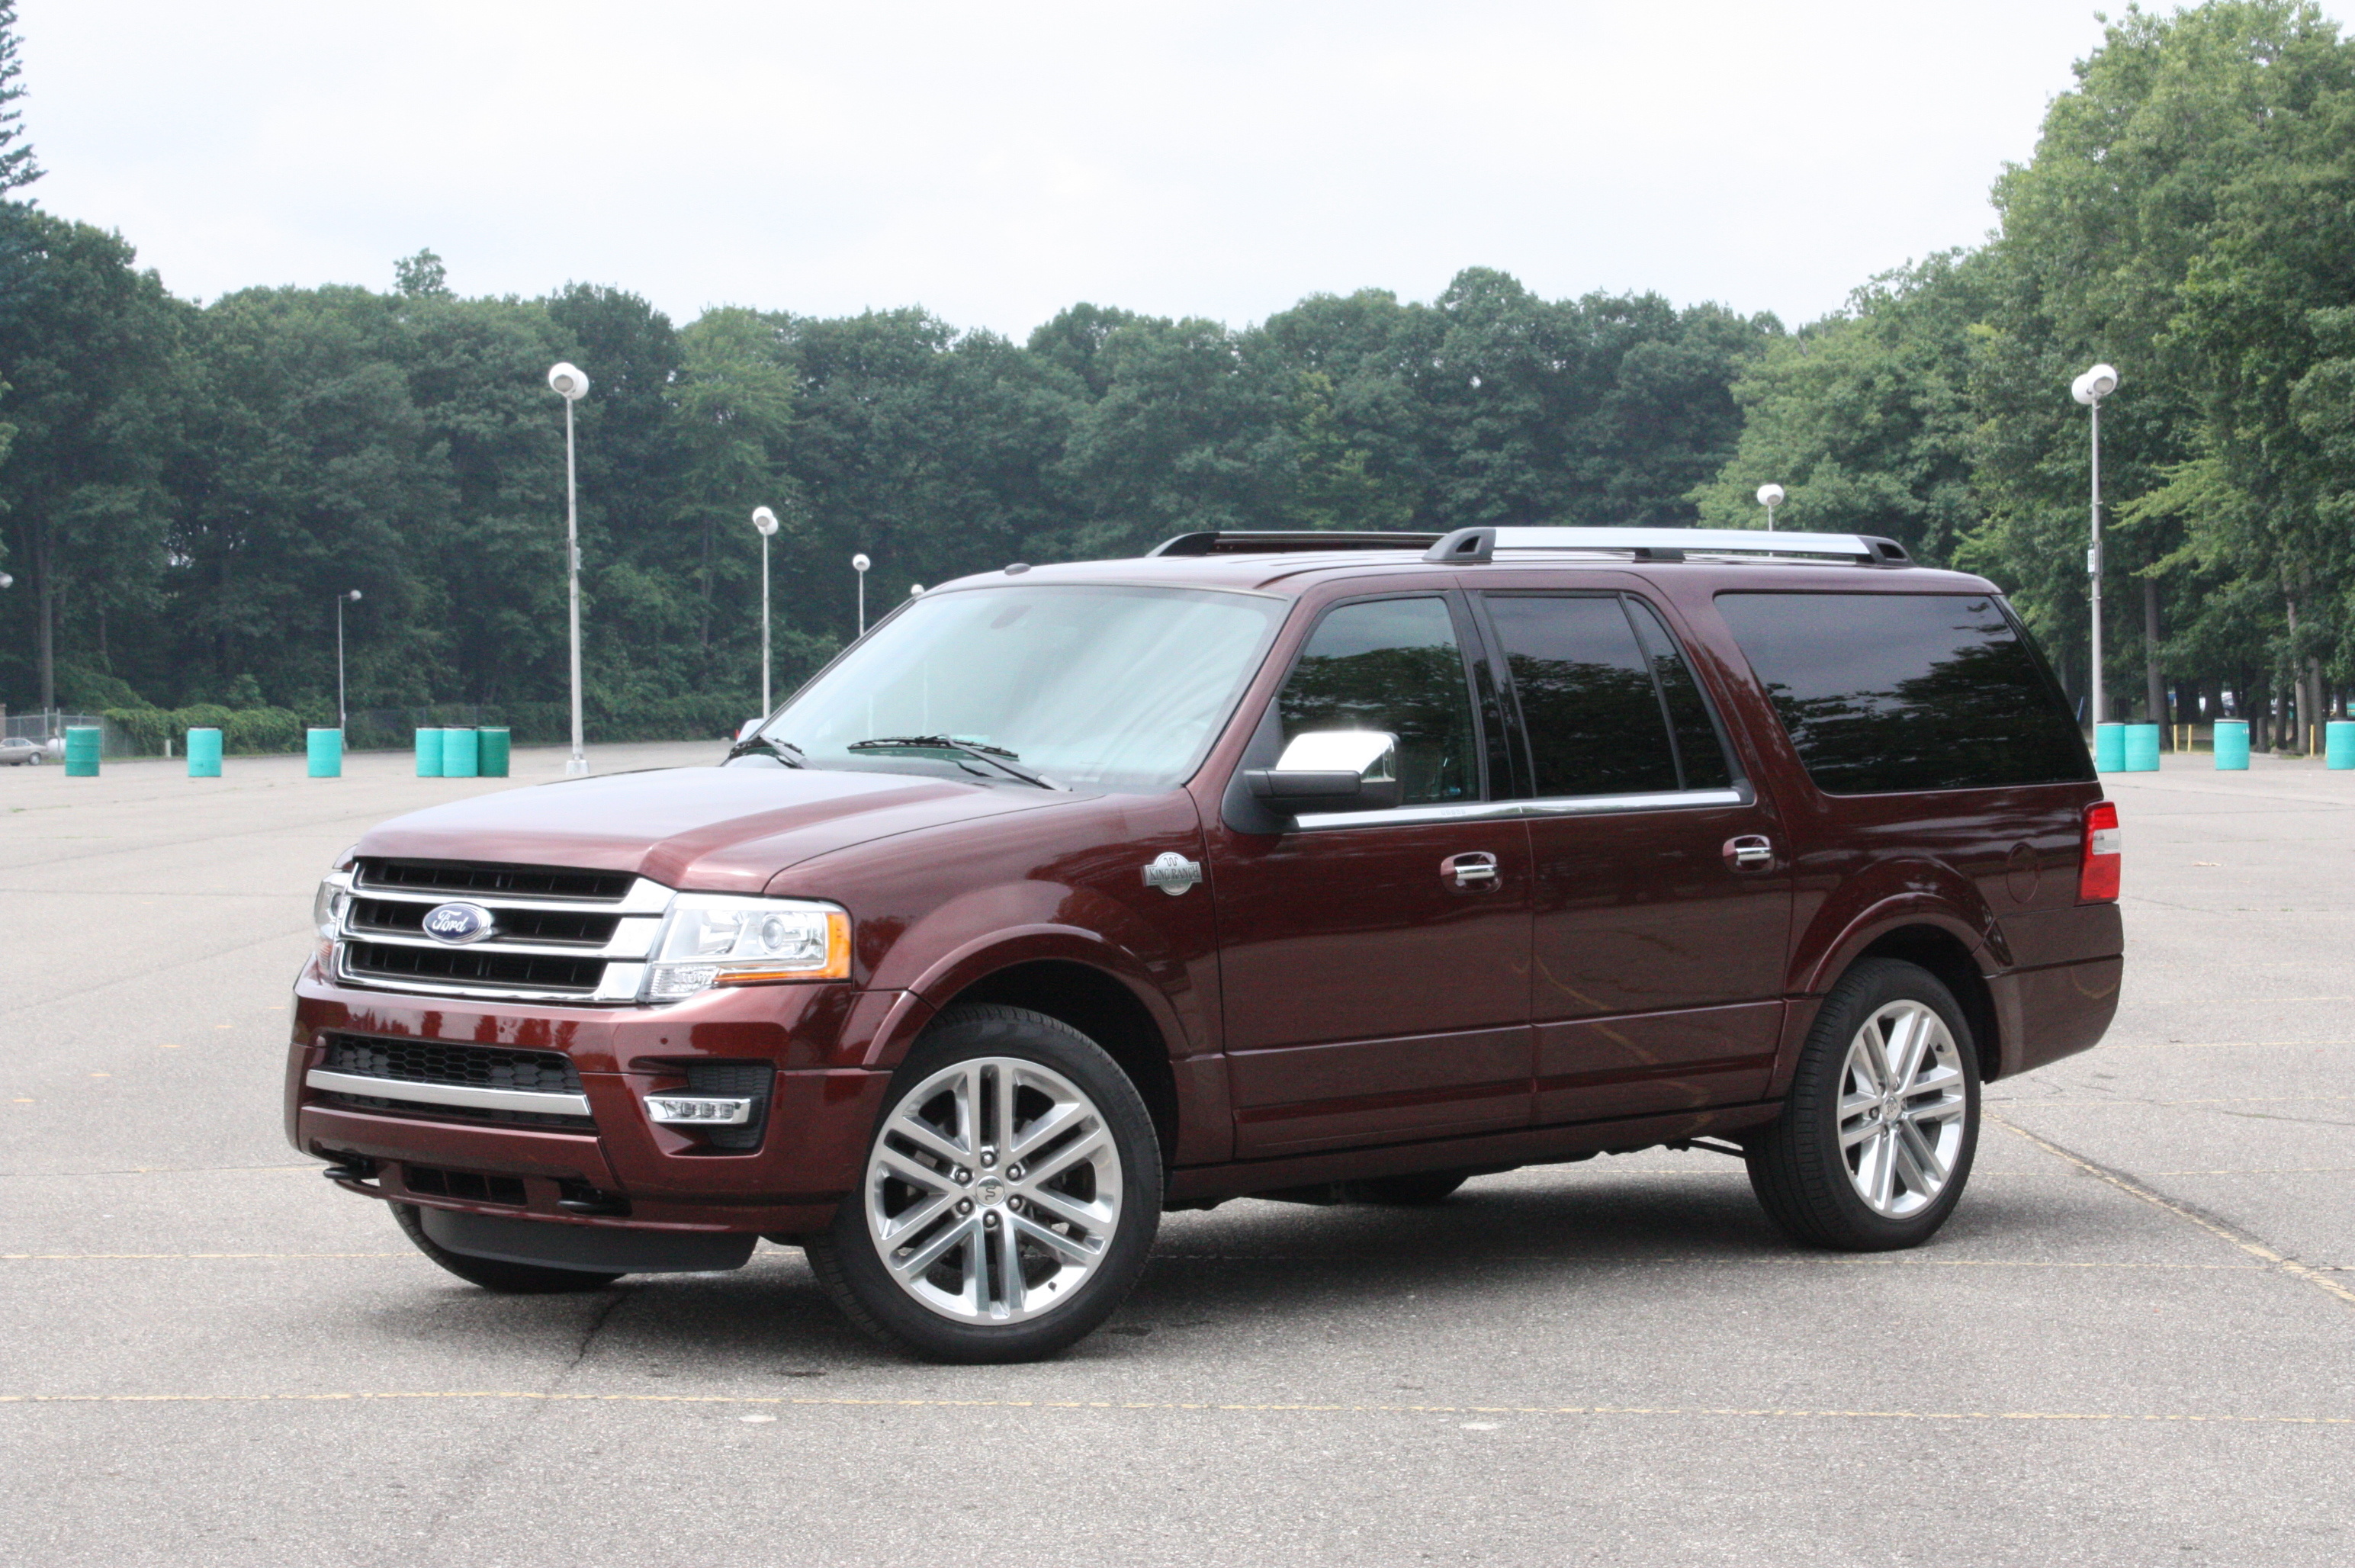 Ford Expedition, Full size SUV, CNET, 3090x2060 HD Desktop